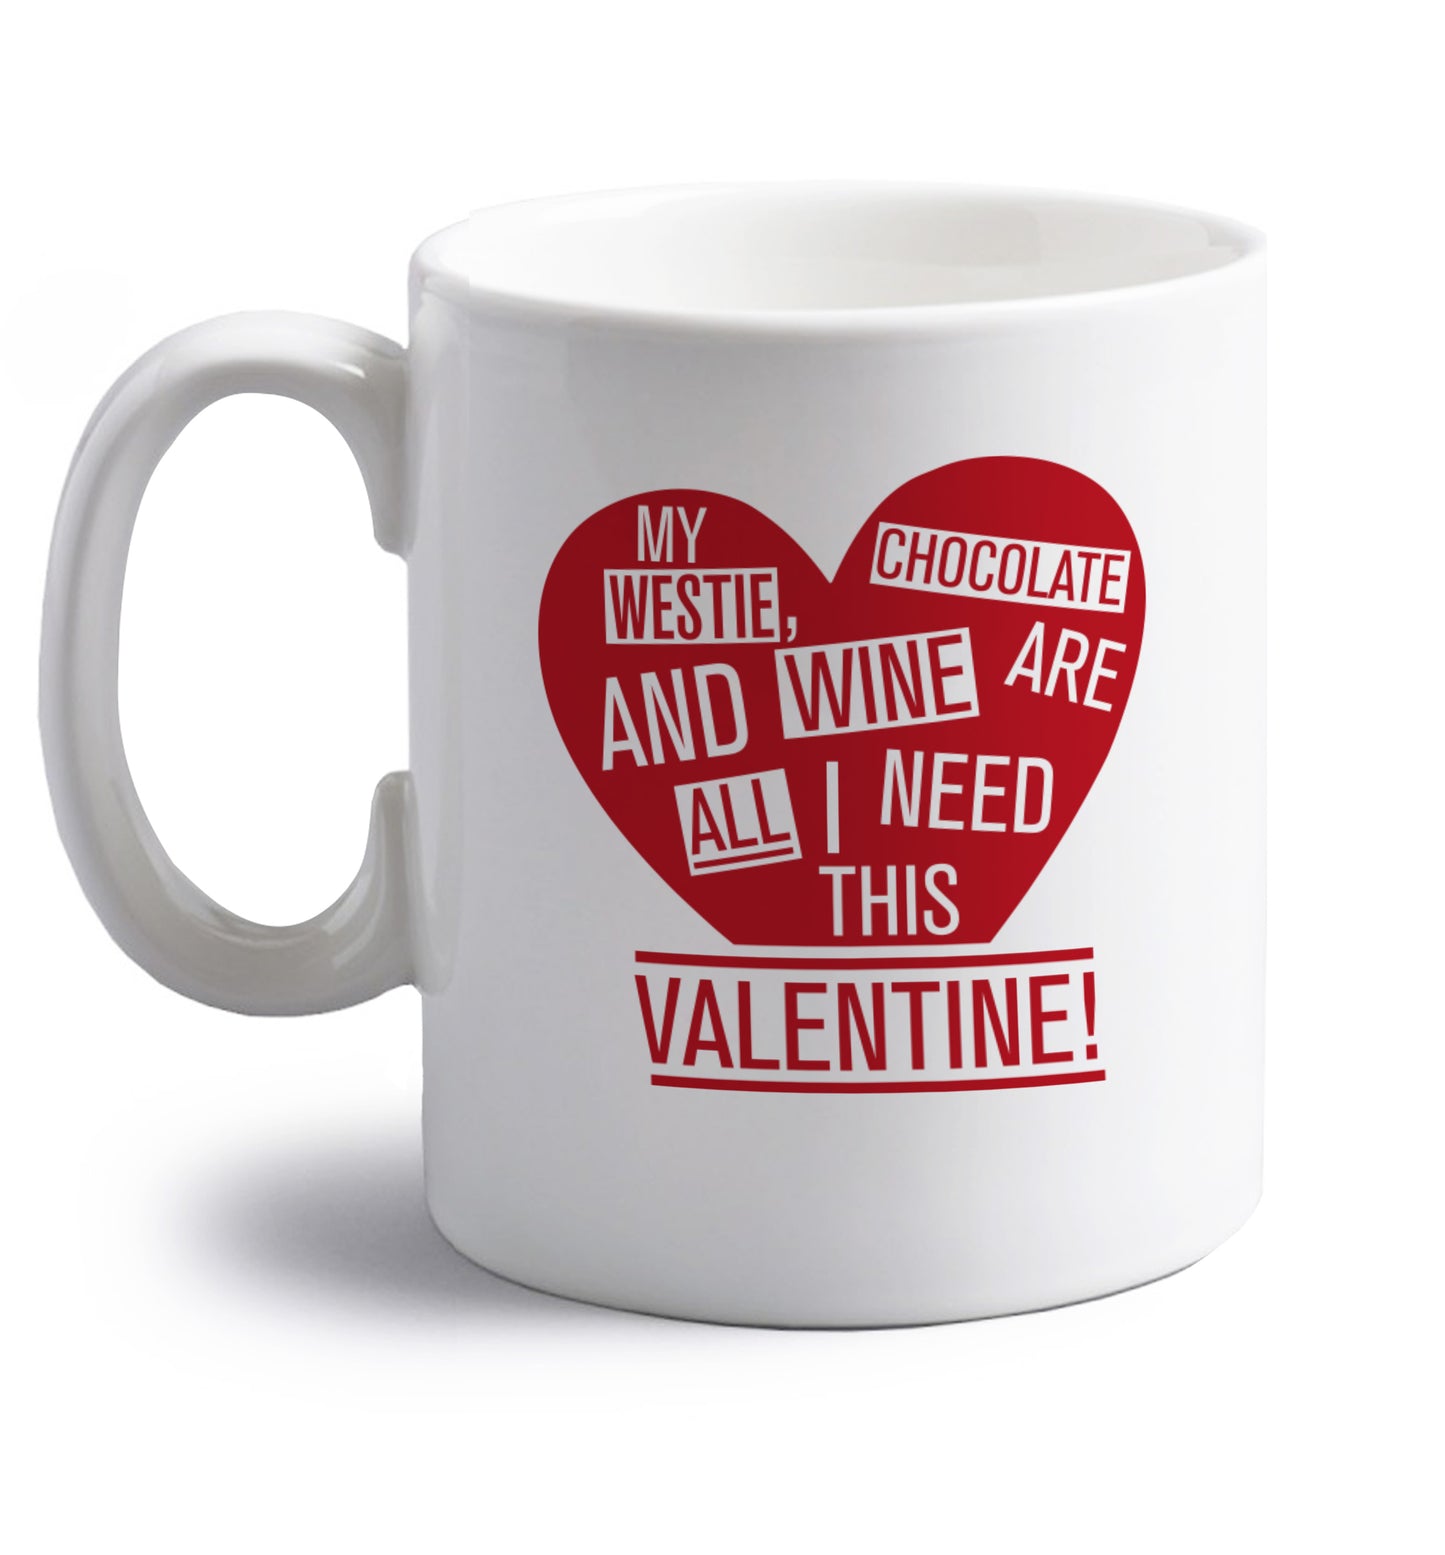 My westie, chocolate and wine are all I need this valentine! right handed white ceramic mug 